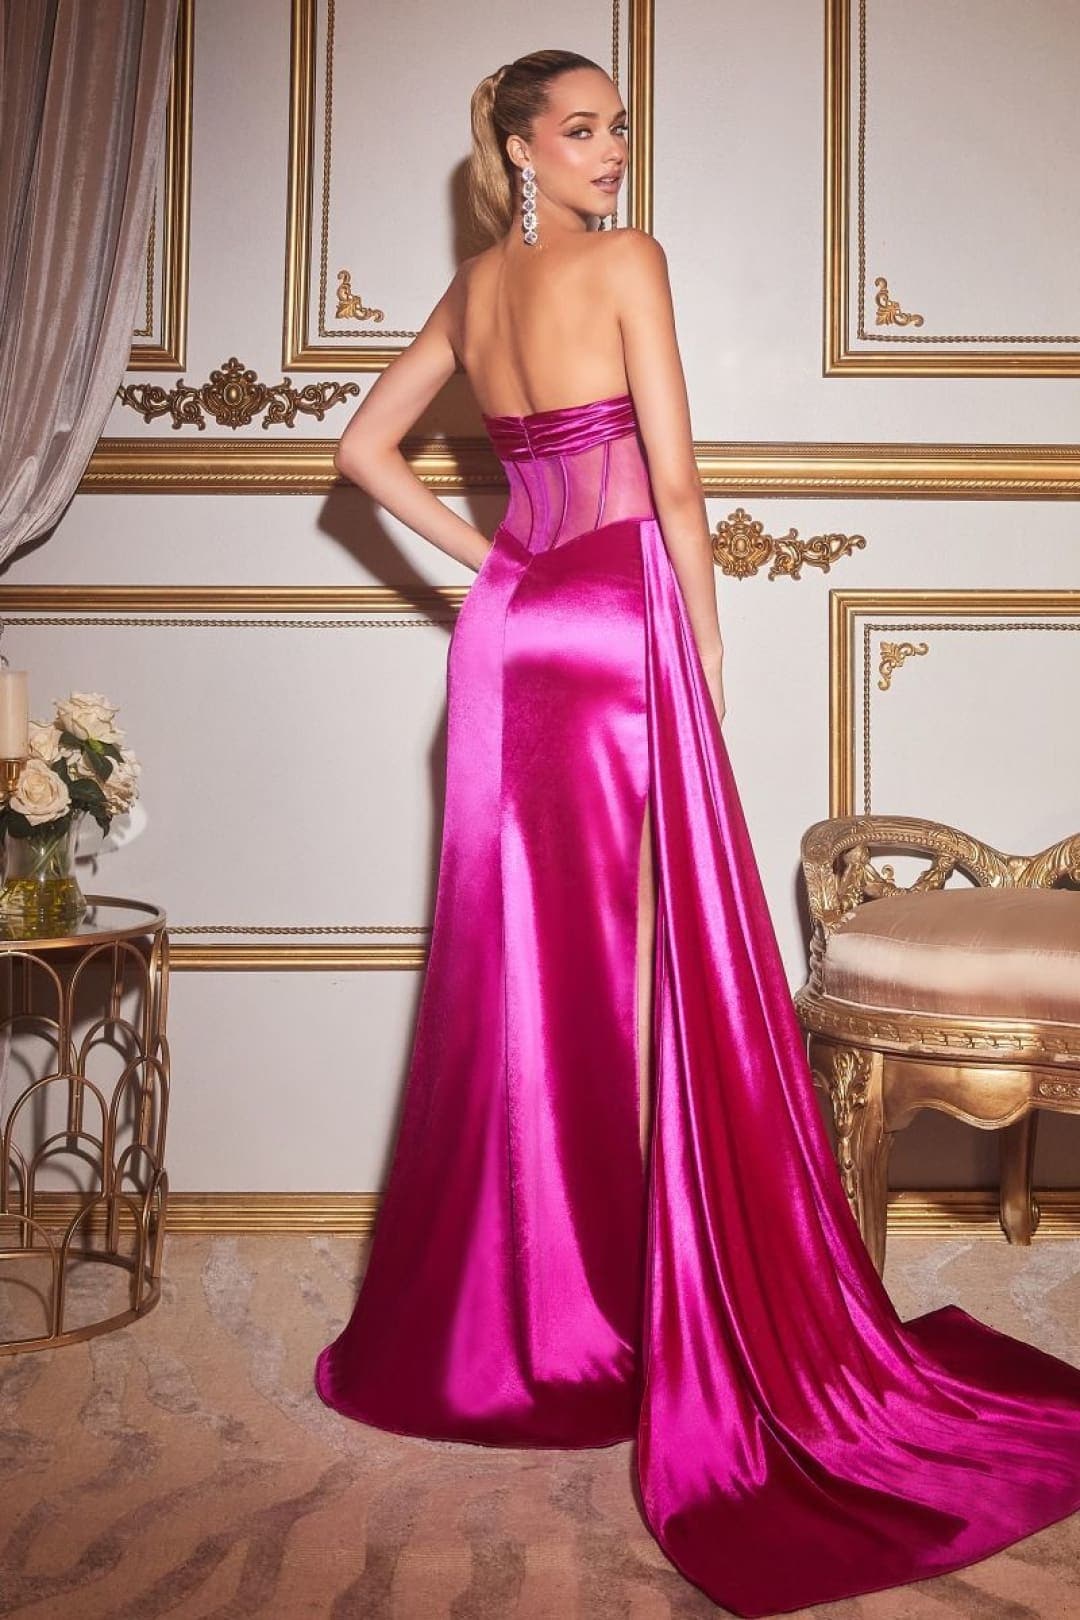 Ladivine CD269 Strapless Illusion Bustier Satin Prom Evening Gown - Dress